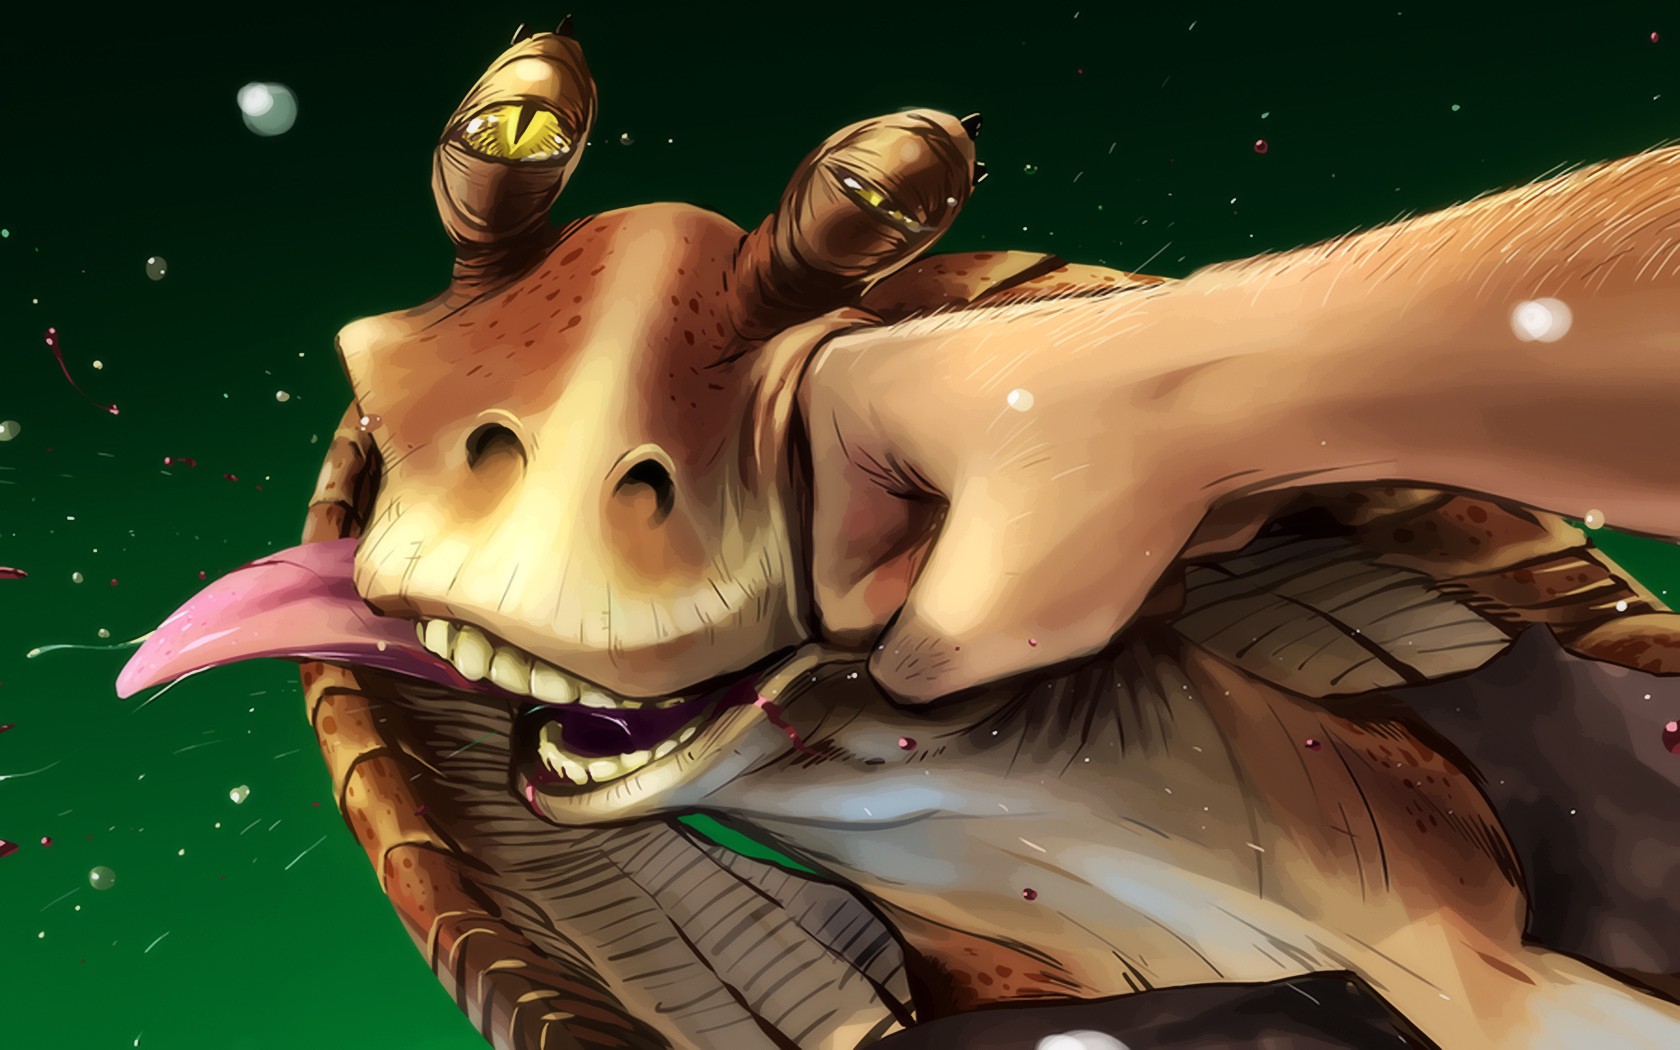 Times Jar Binks Opened His Mouth And Ruined Star Wars Episode